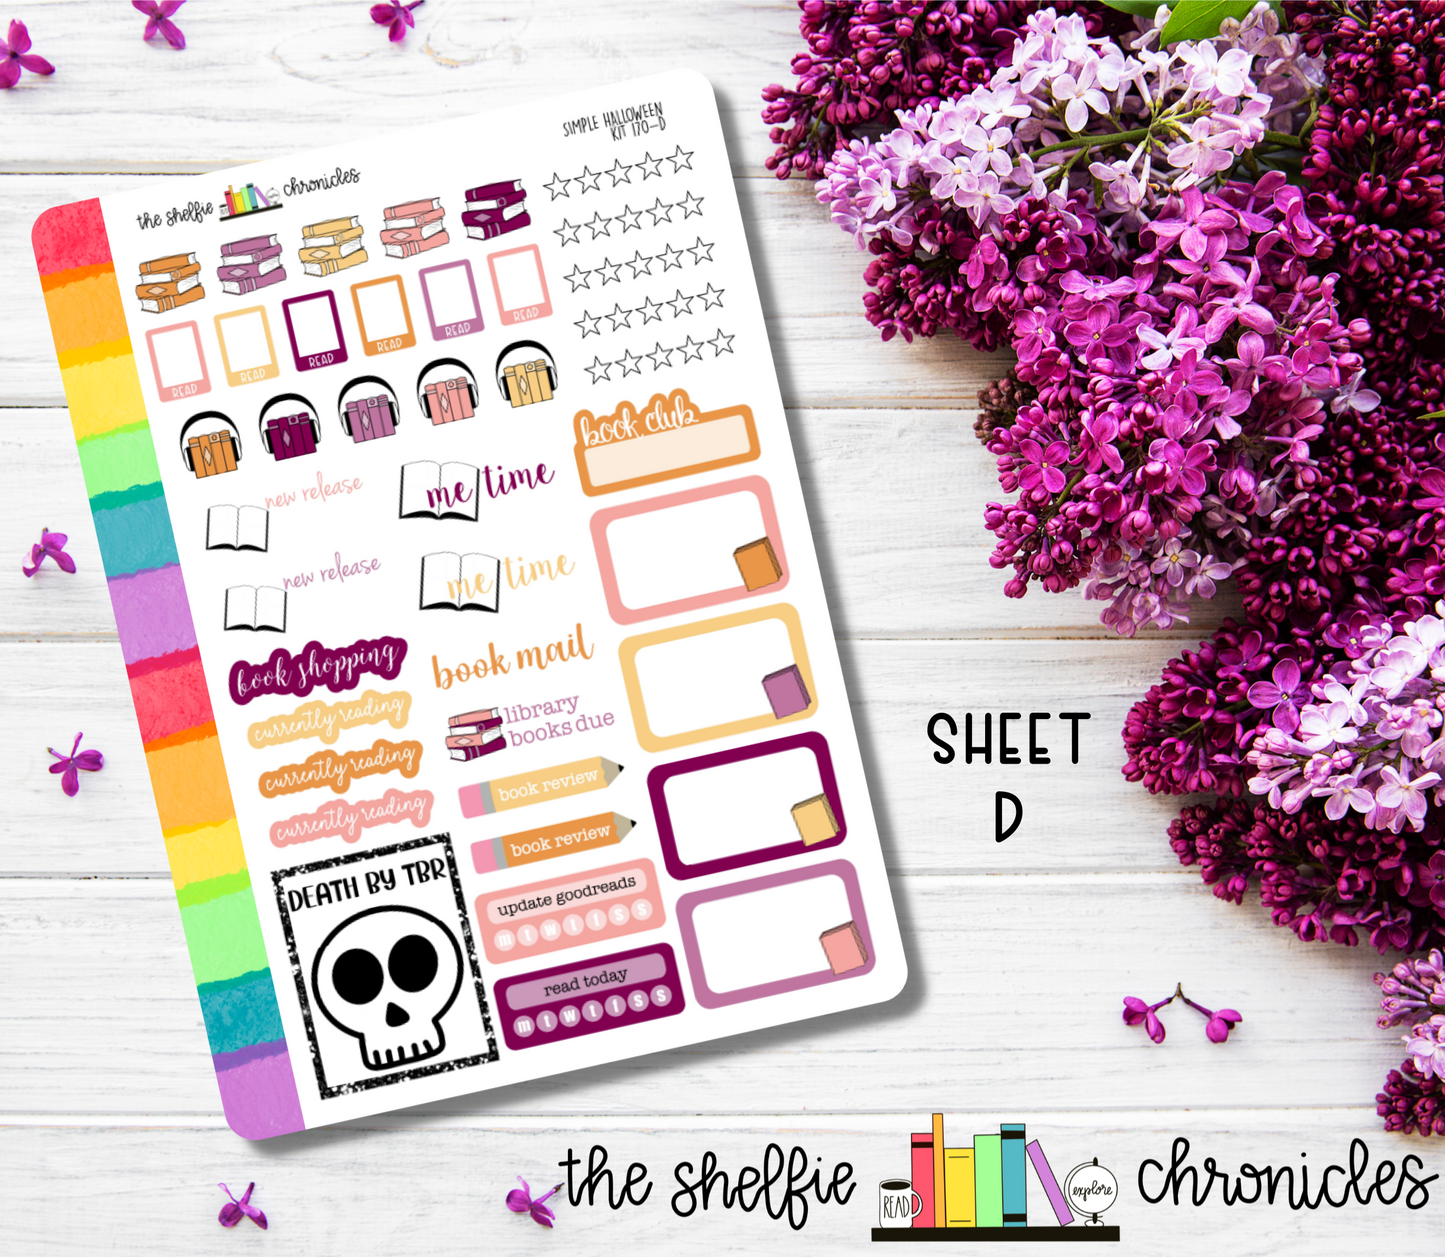 Kit 170 - Simple Halloween Weekly Kit - Die Cut Stickers - Repositionable Paper - Made To Fit 7x9 Planners